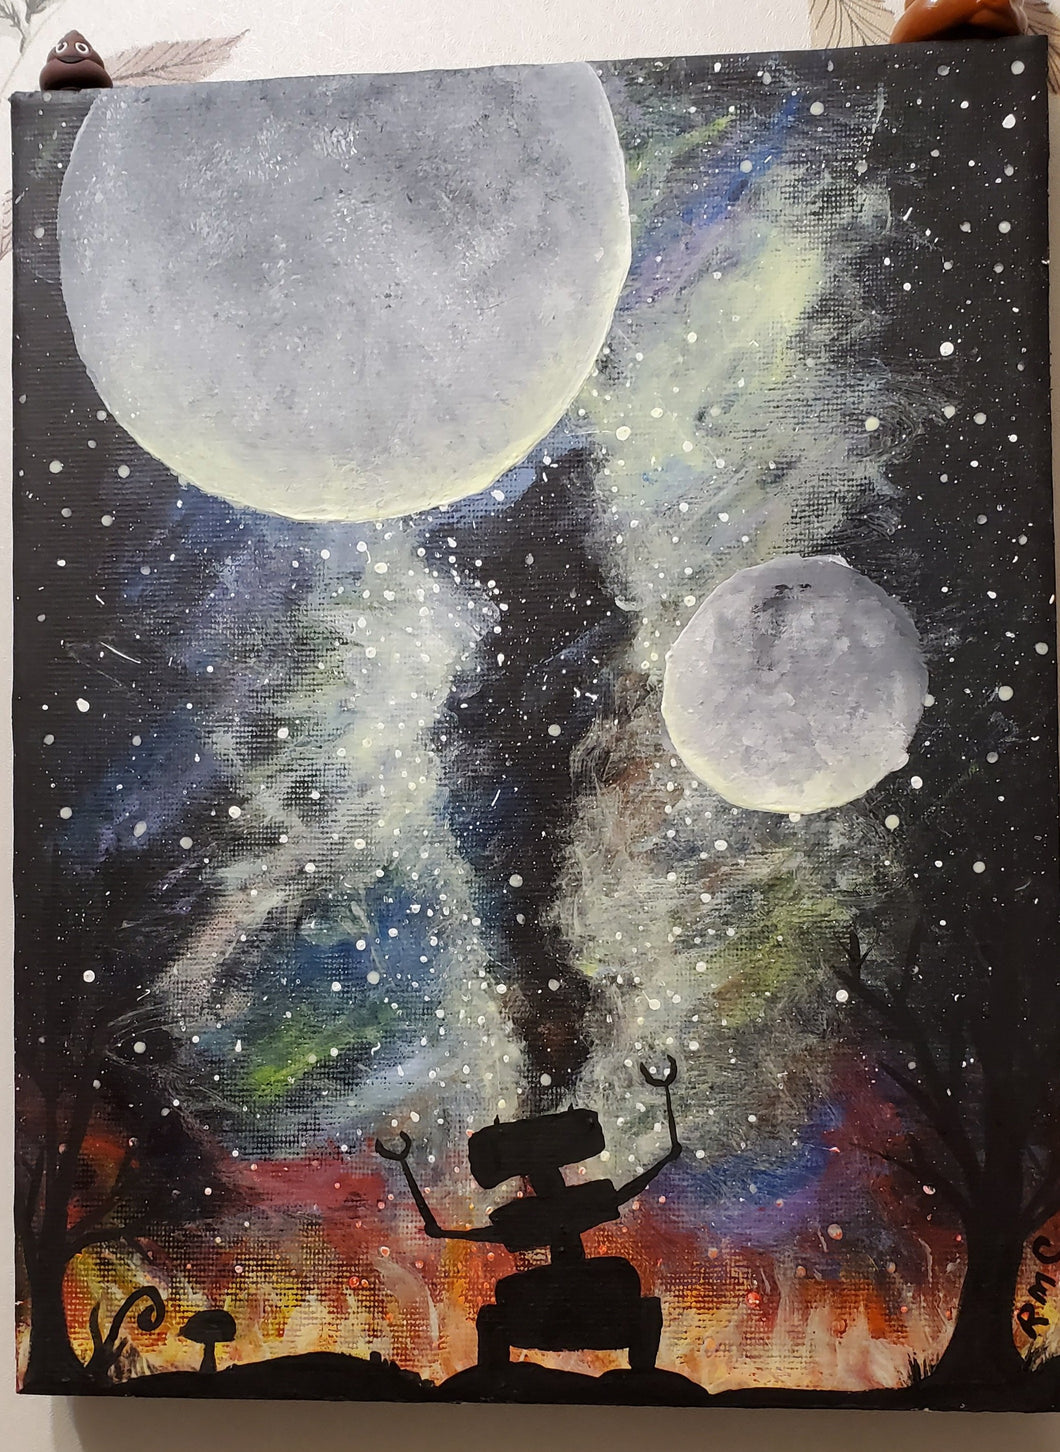 Space and Robot Glow In The Dark Acrylic Painting Dark Whimsical Art Roxanne Crouse